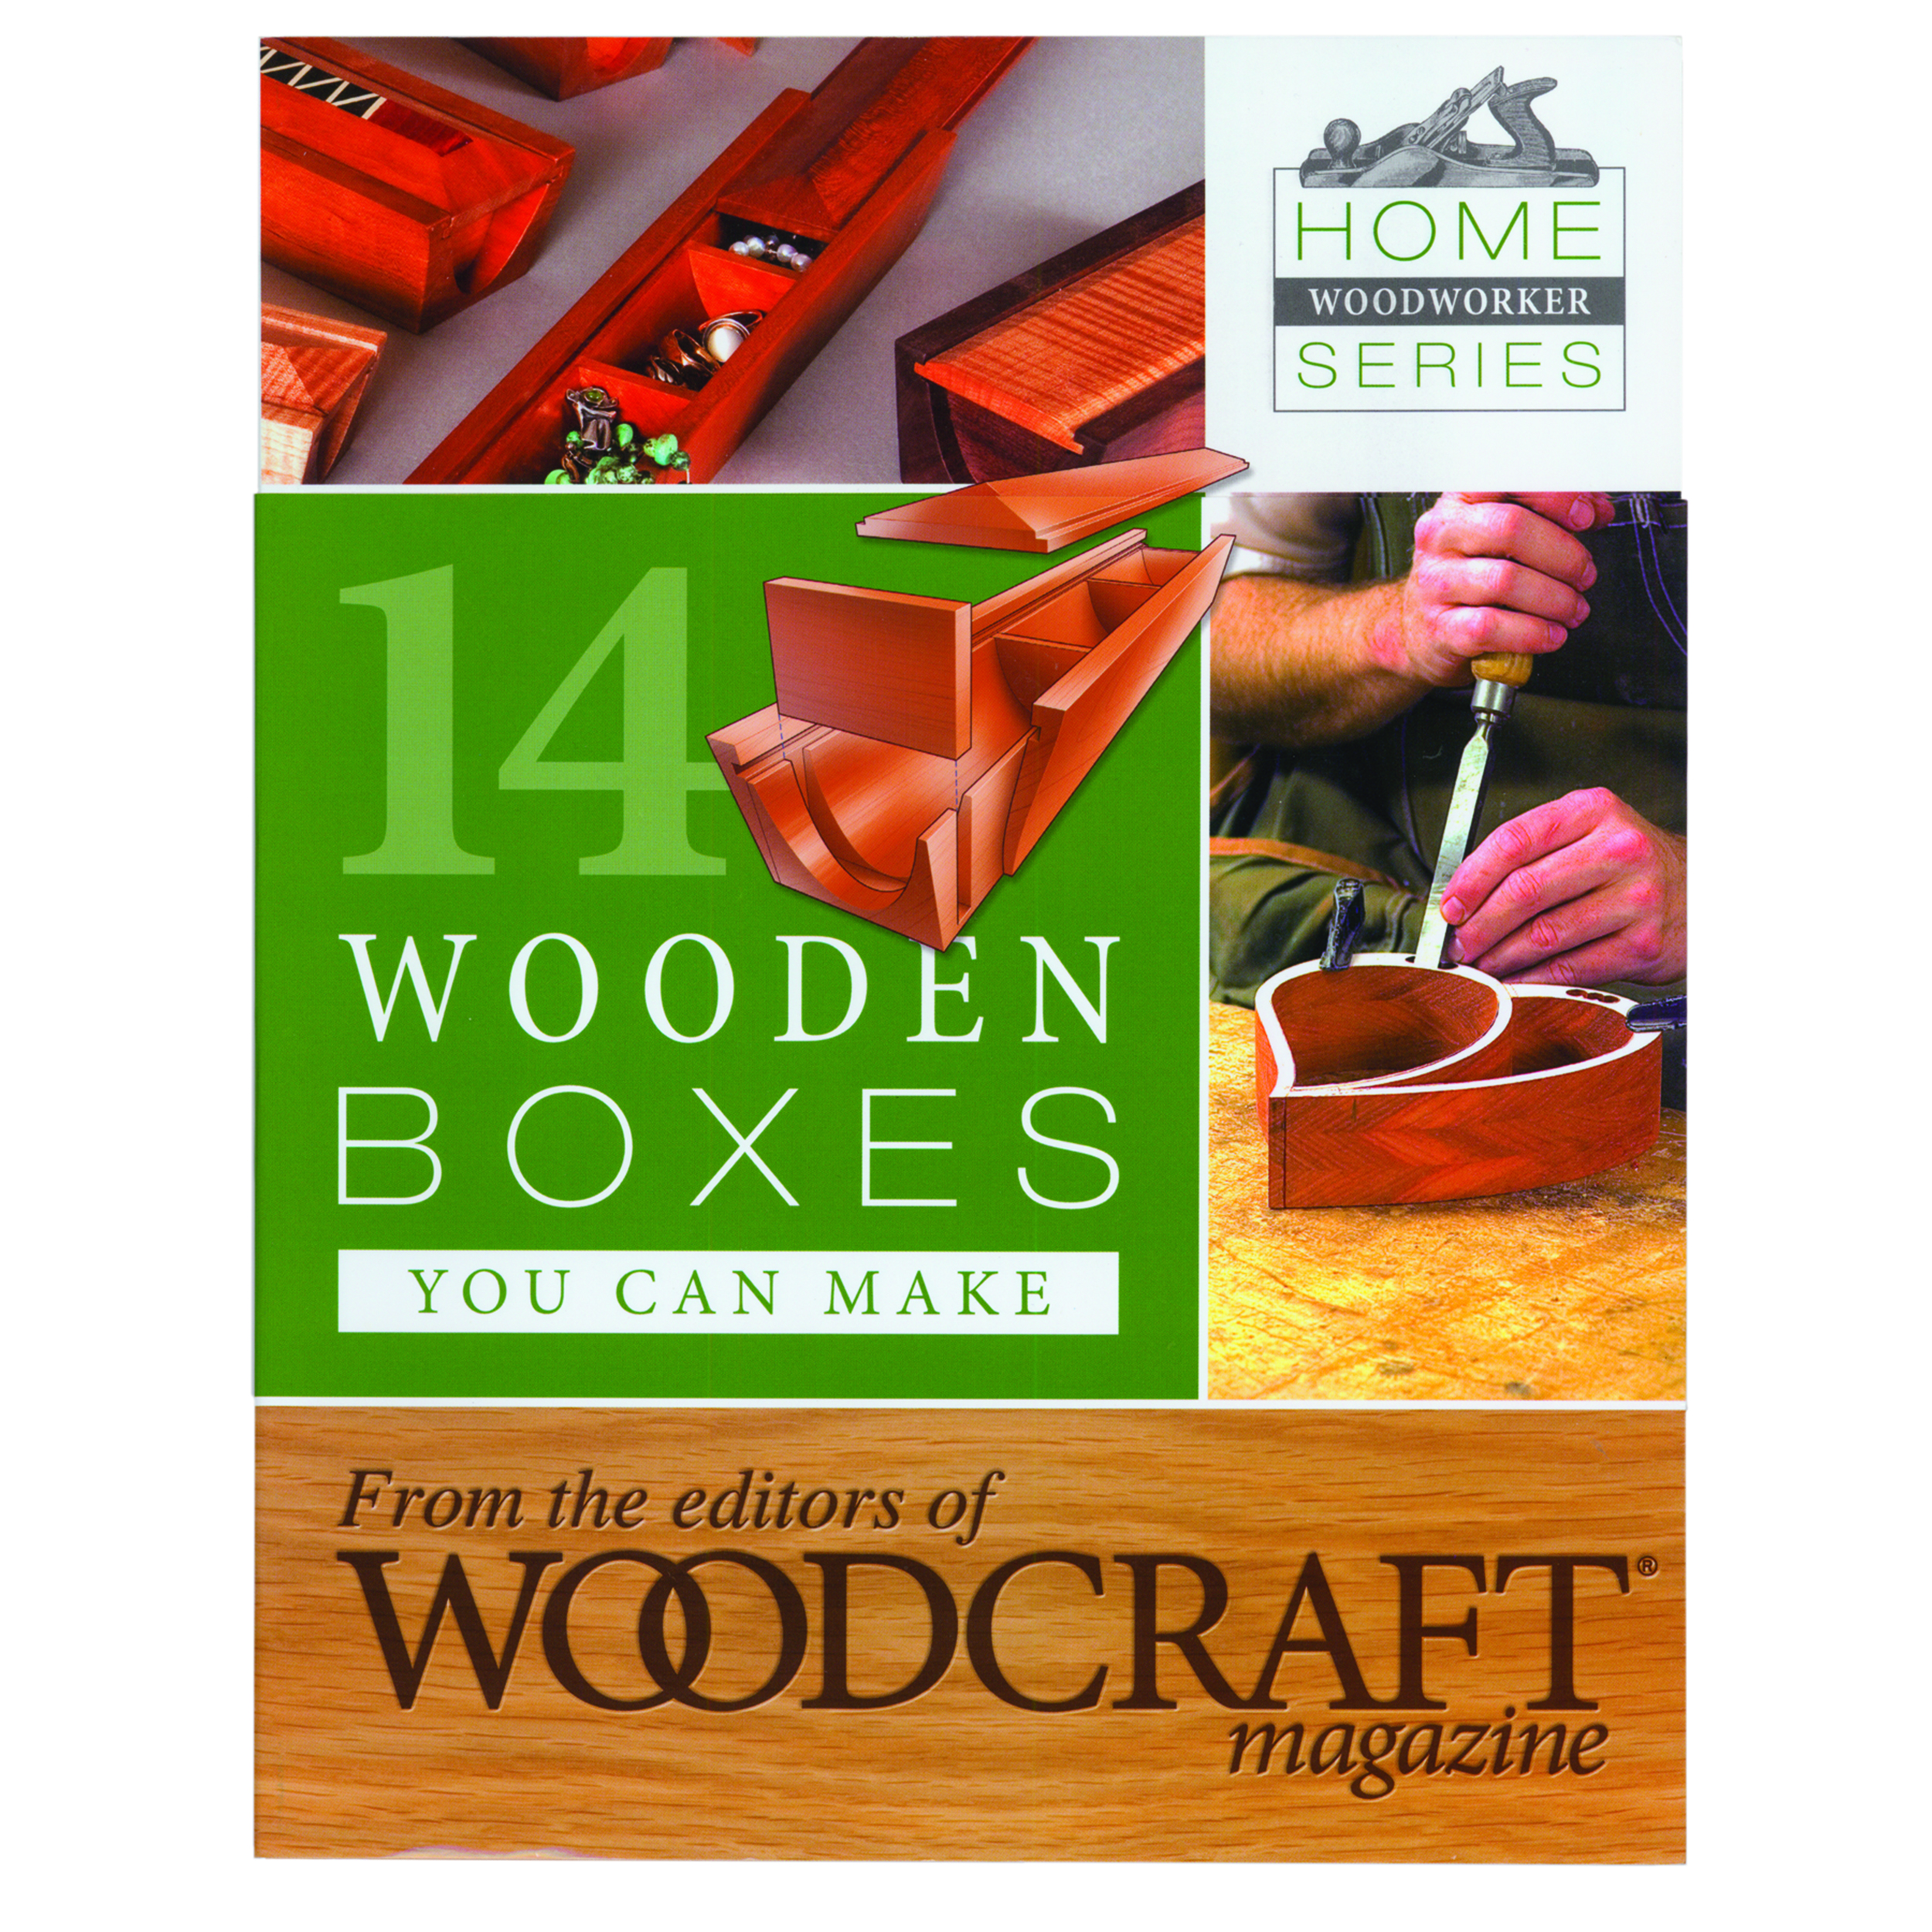 14 Wooden Boxes You Can Make